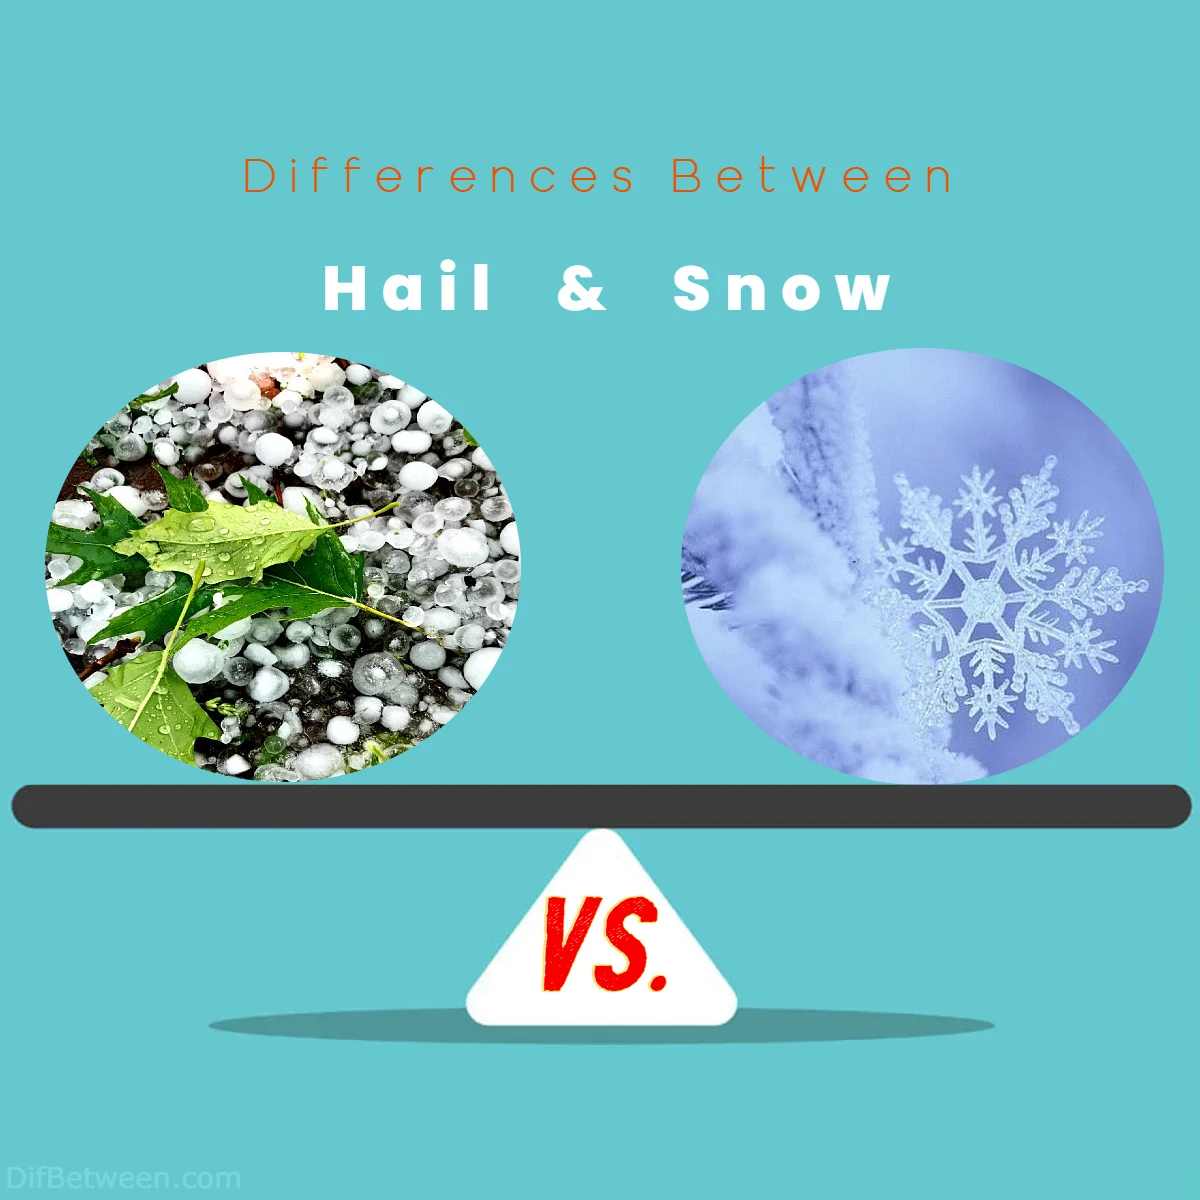 Differences Between Hail vs Snow